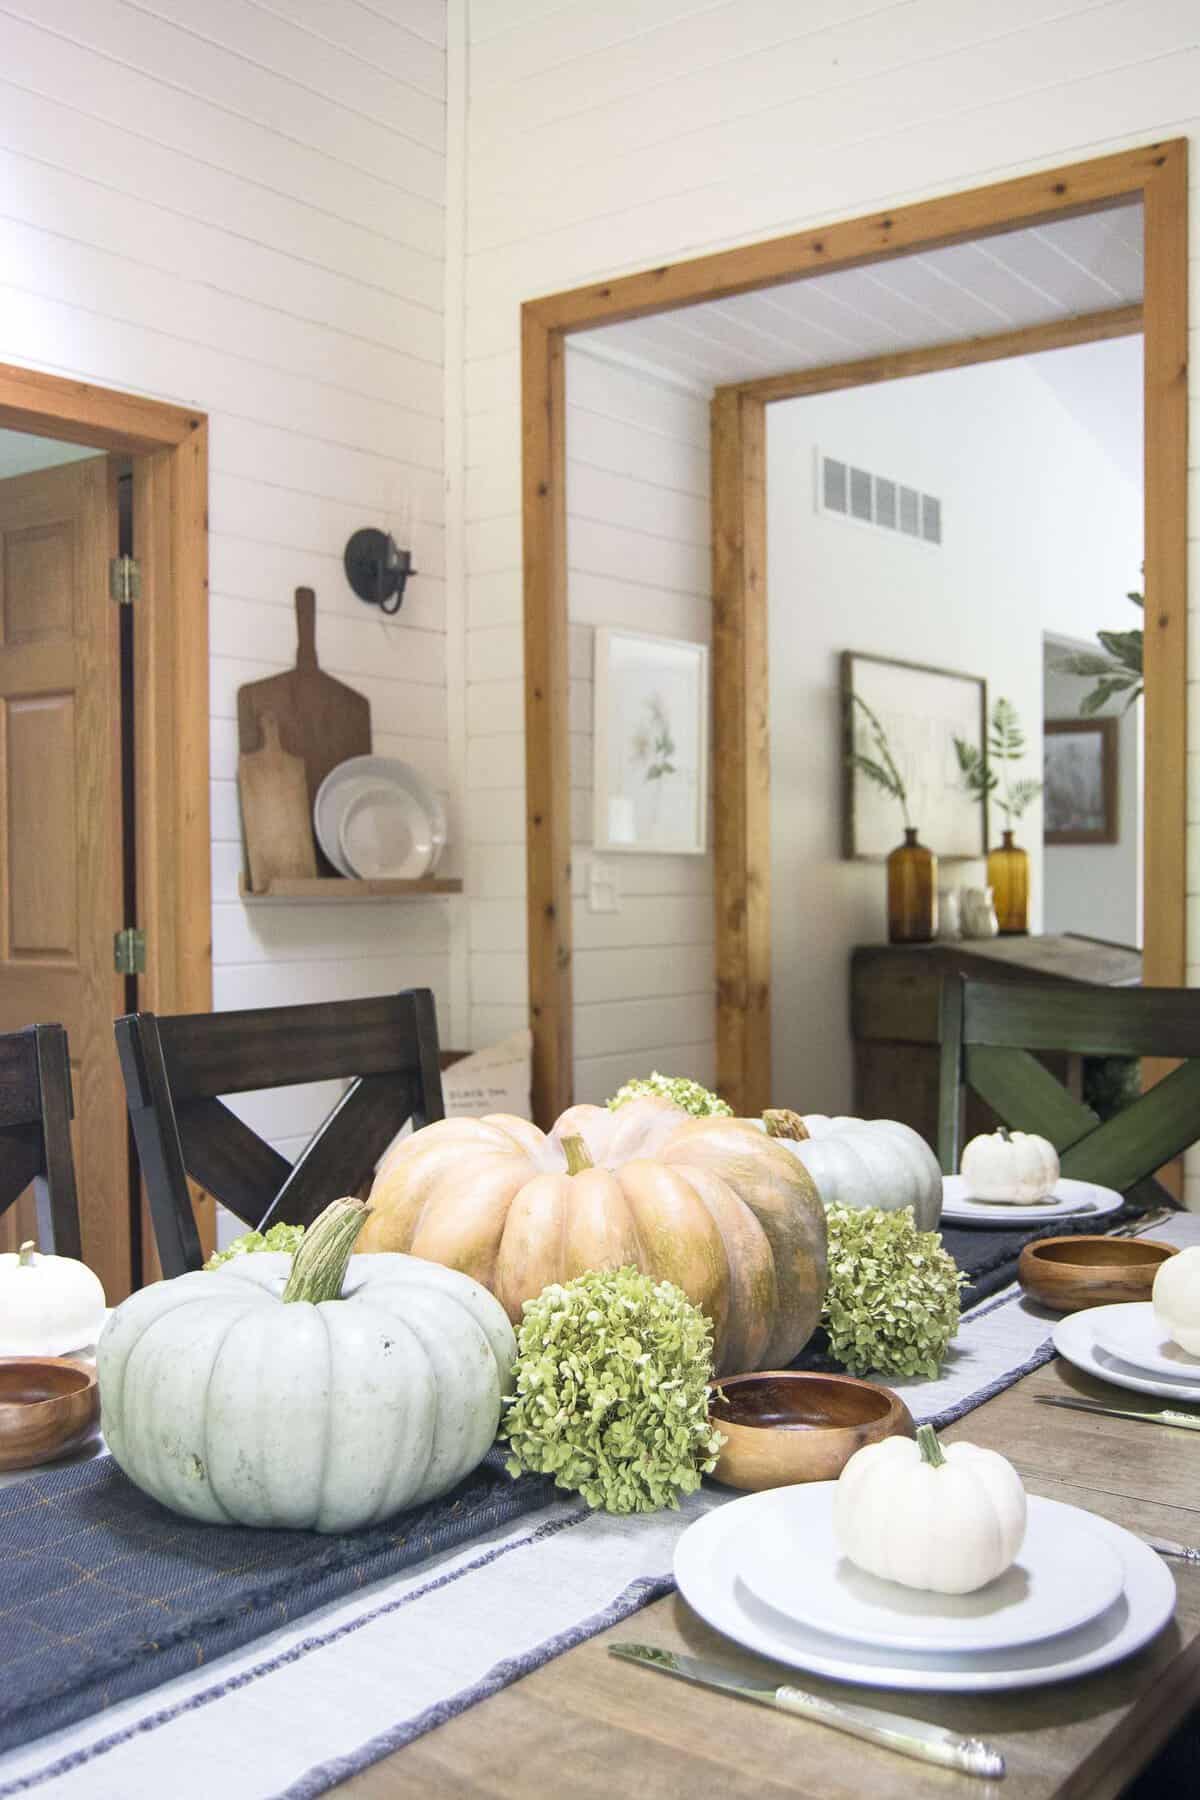 Dining in the Fall | Read more to see simple and affordable fall decor ideas for the kitchen and dining room! #falldecorideas #diningroomdecor